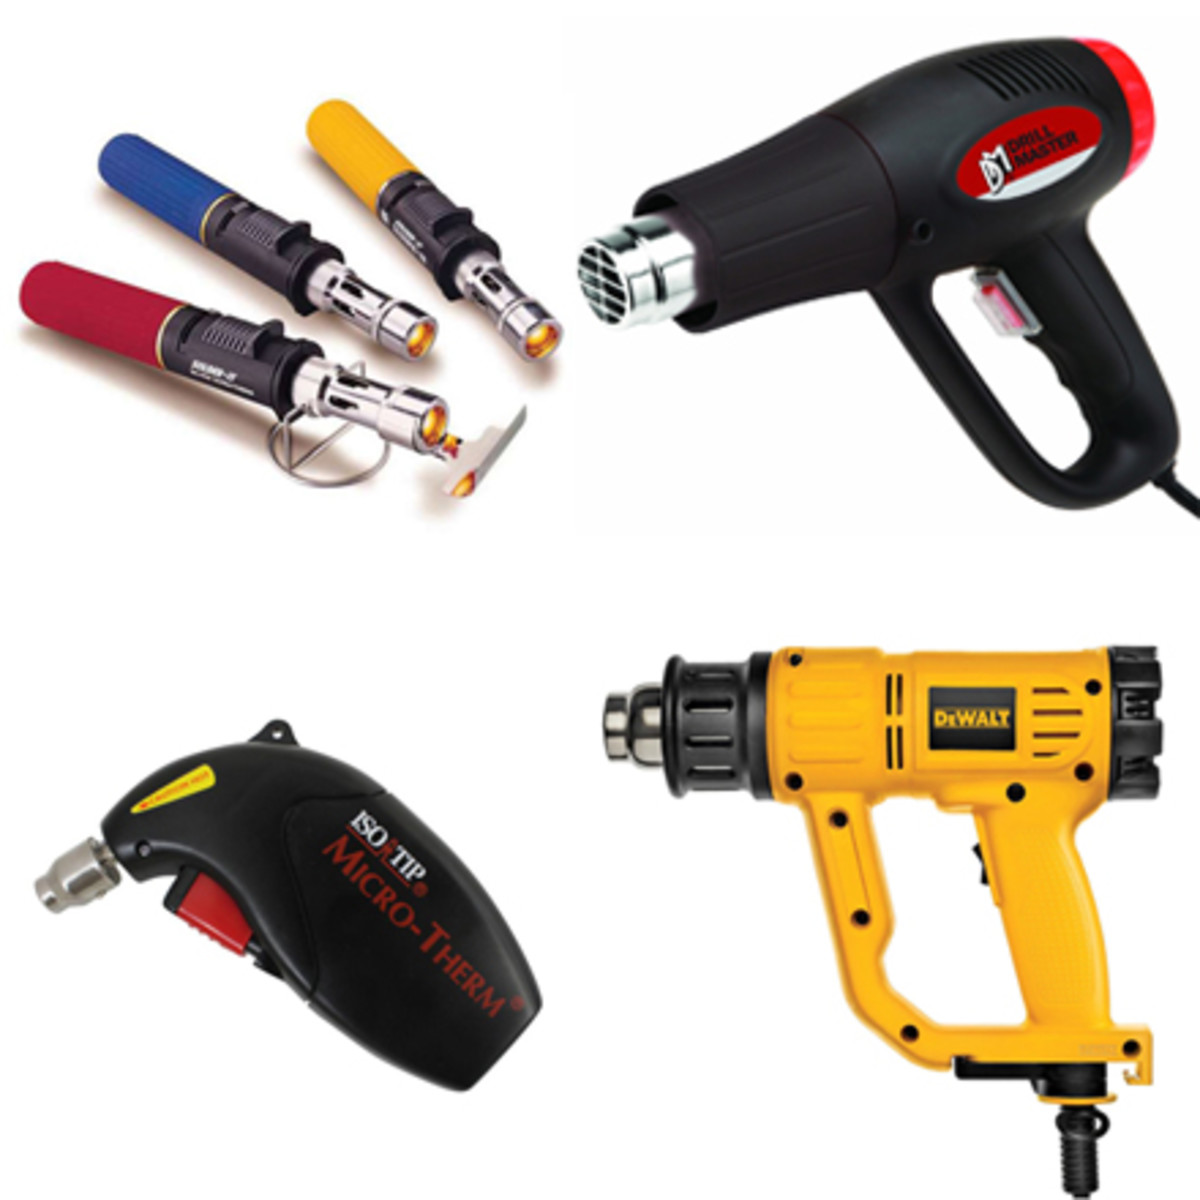 Heat guns come in all shapes and sizes, form small handhelds to power drill sizes, to cover a range of projects. Knowing your abilities is vital when handling a heat gun because when things go south you can wind up torching your boat to the waterline.